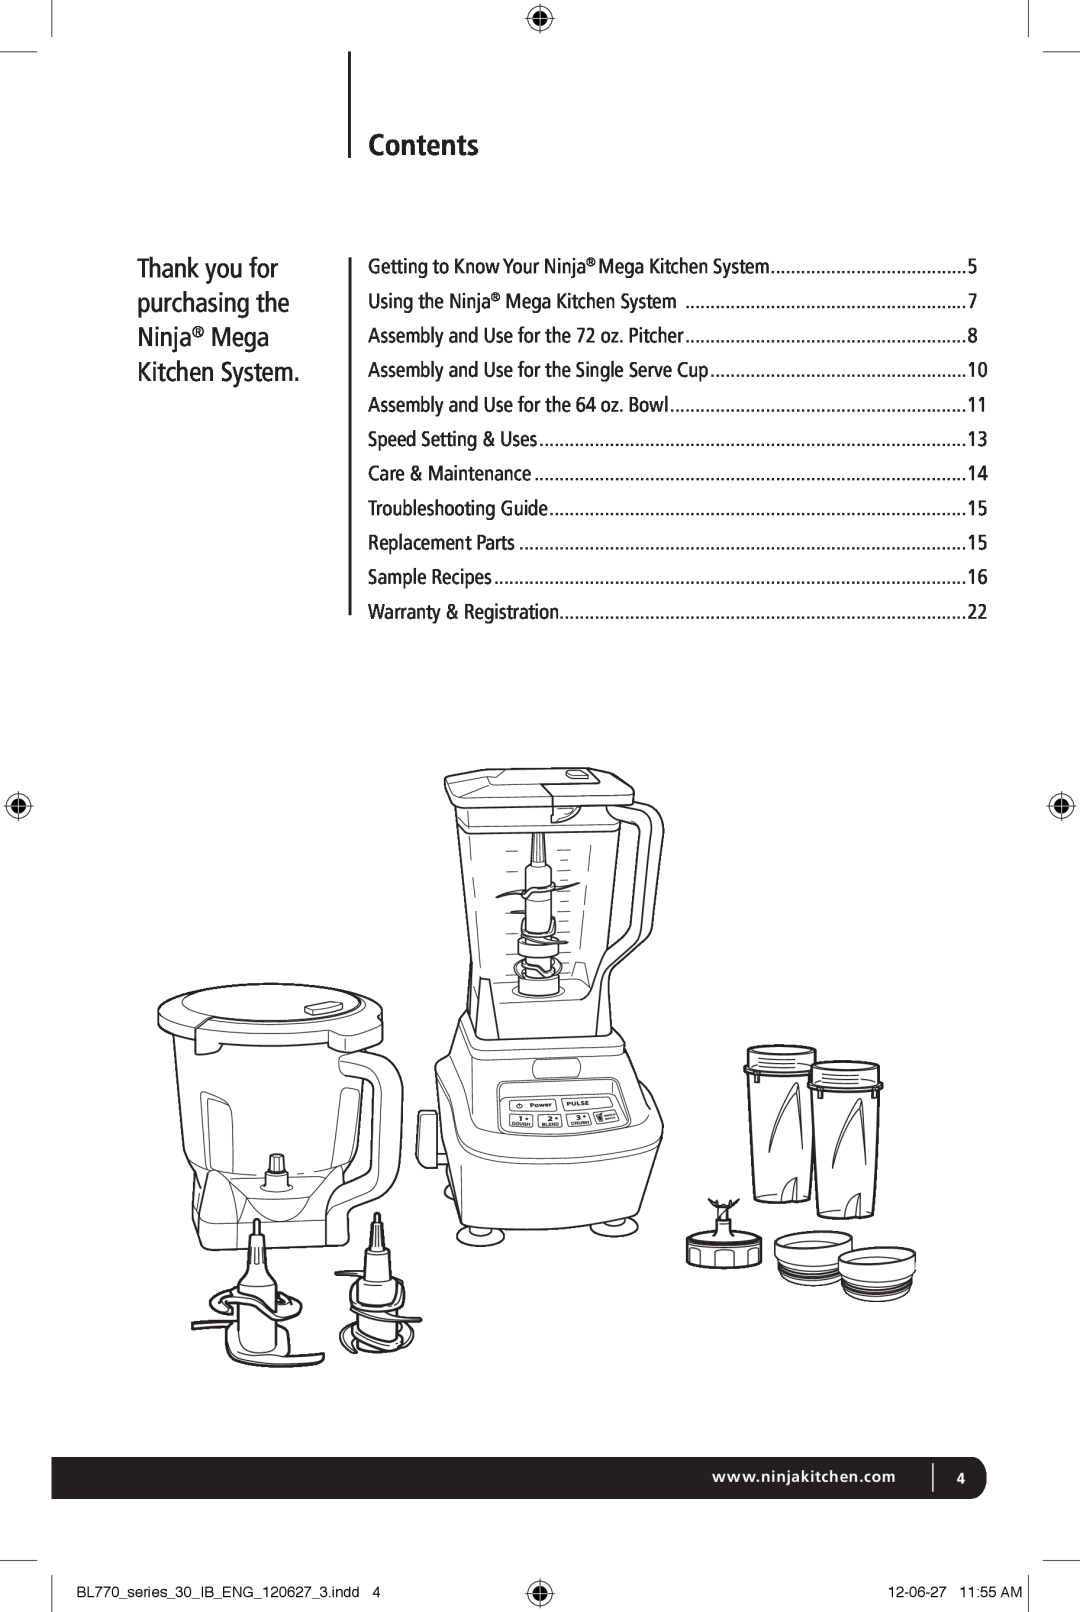 Euro-Pro BL770 manual Contents, Thank you for purchasing the Ninja Mega Kitchen System 